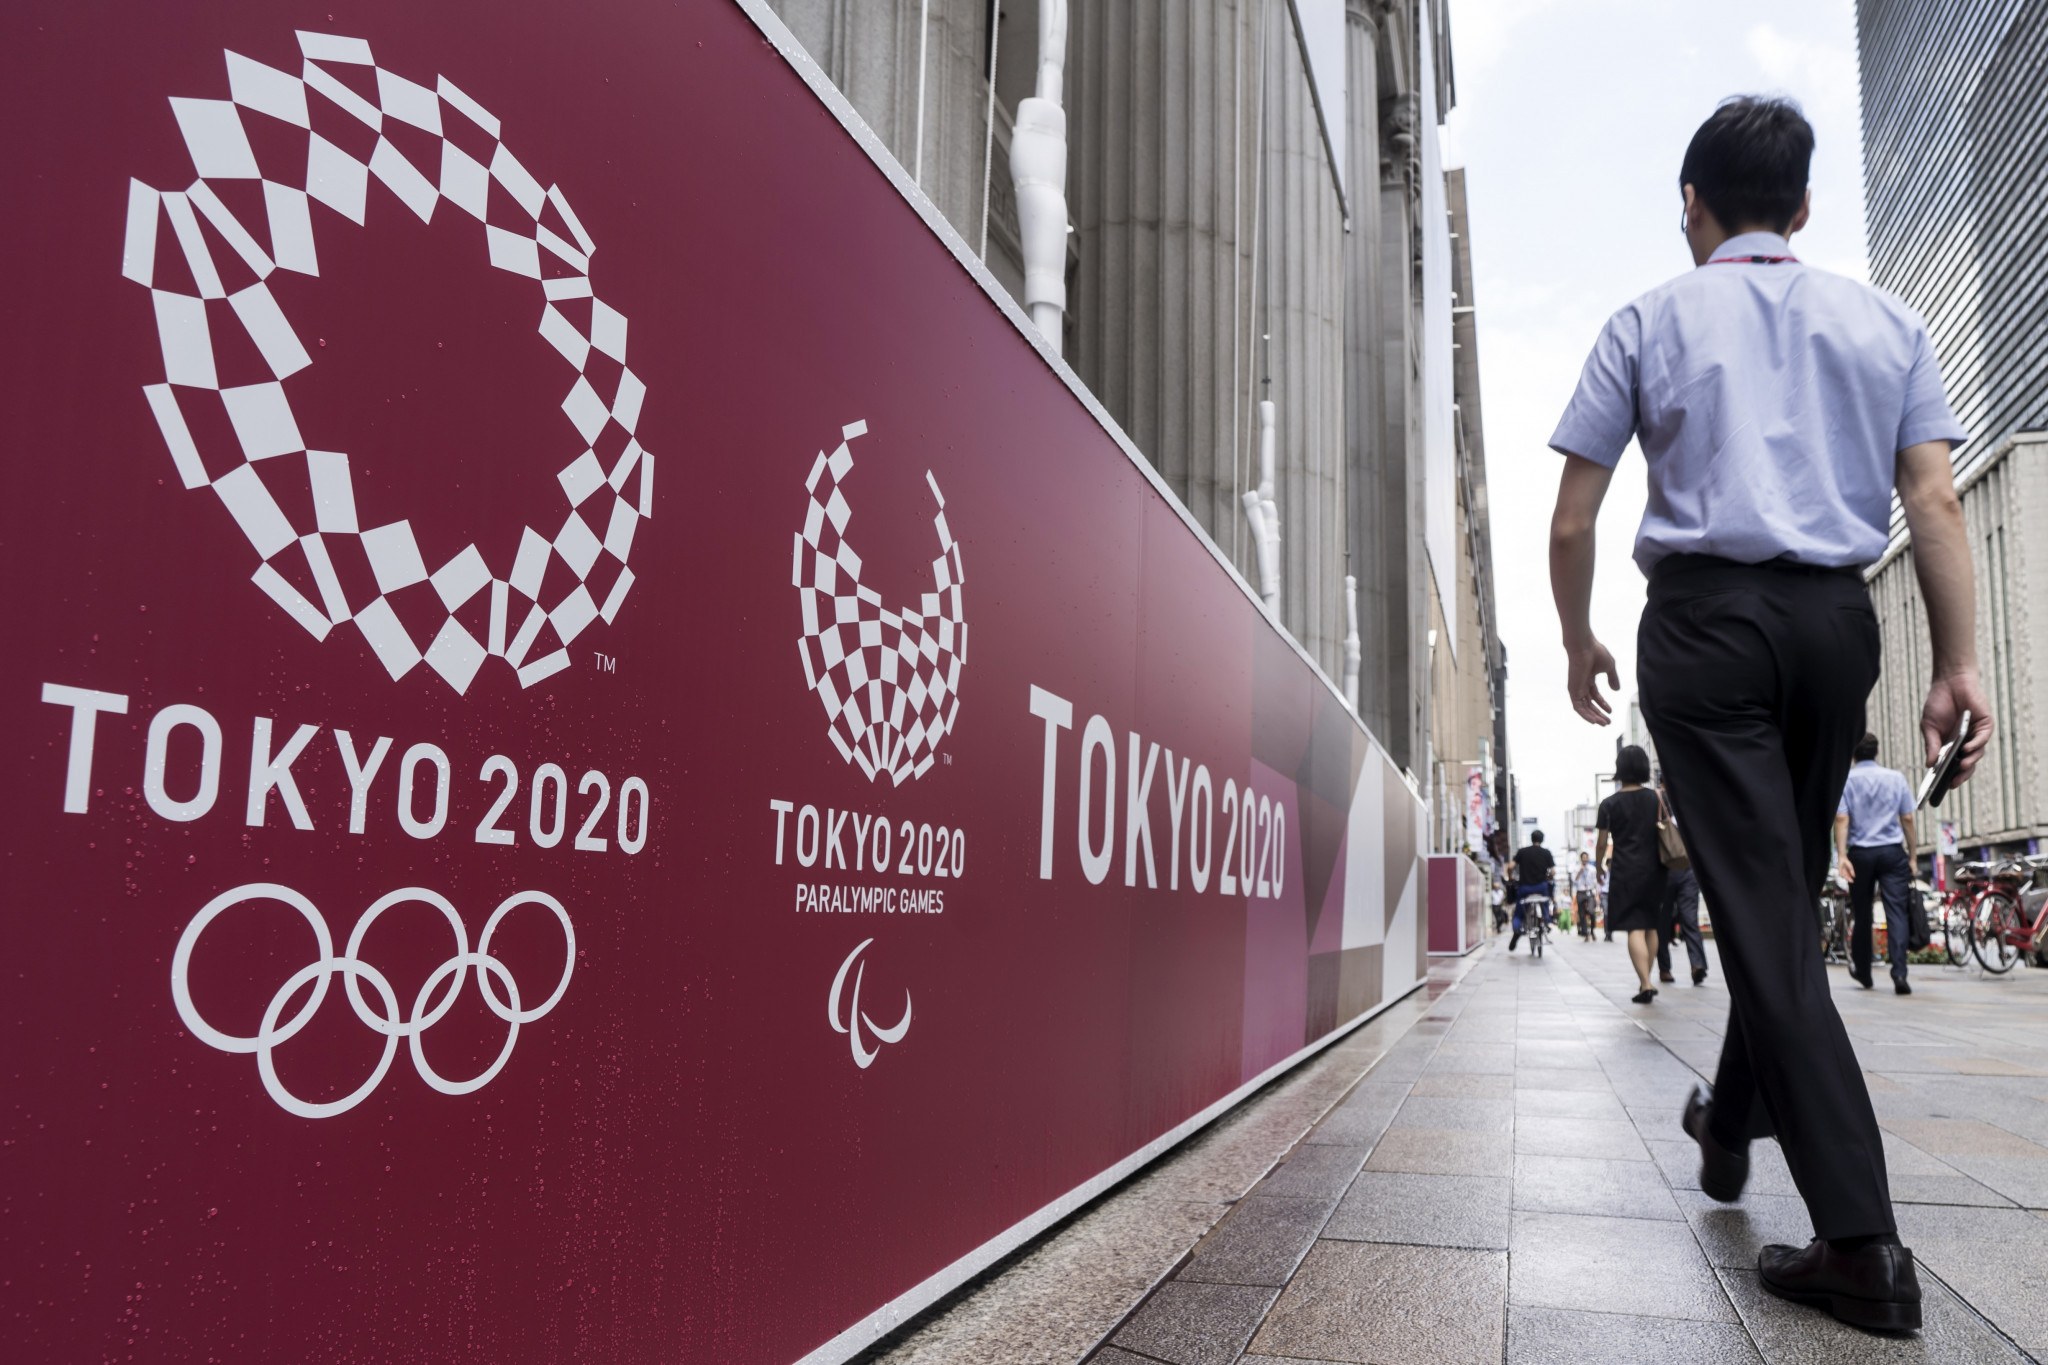 Banners and signage for Tokyo 2020 will be upcycled in benches and floors ©Getty Images